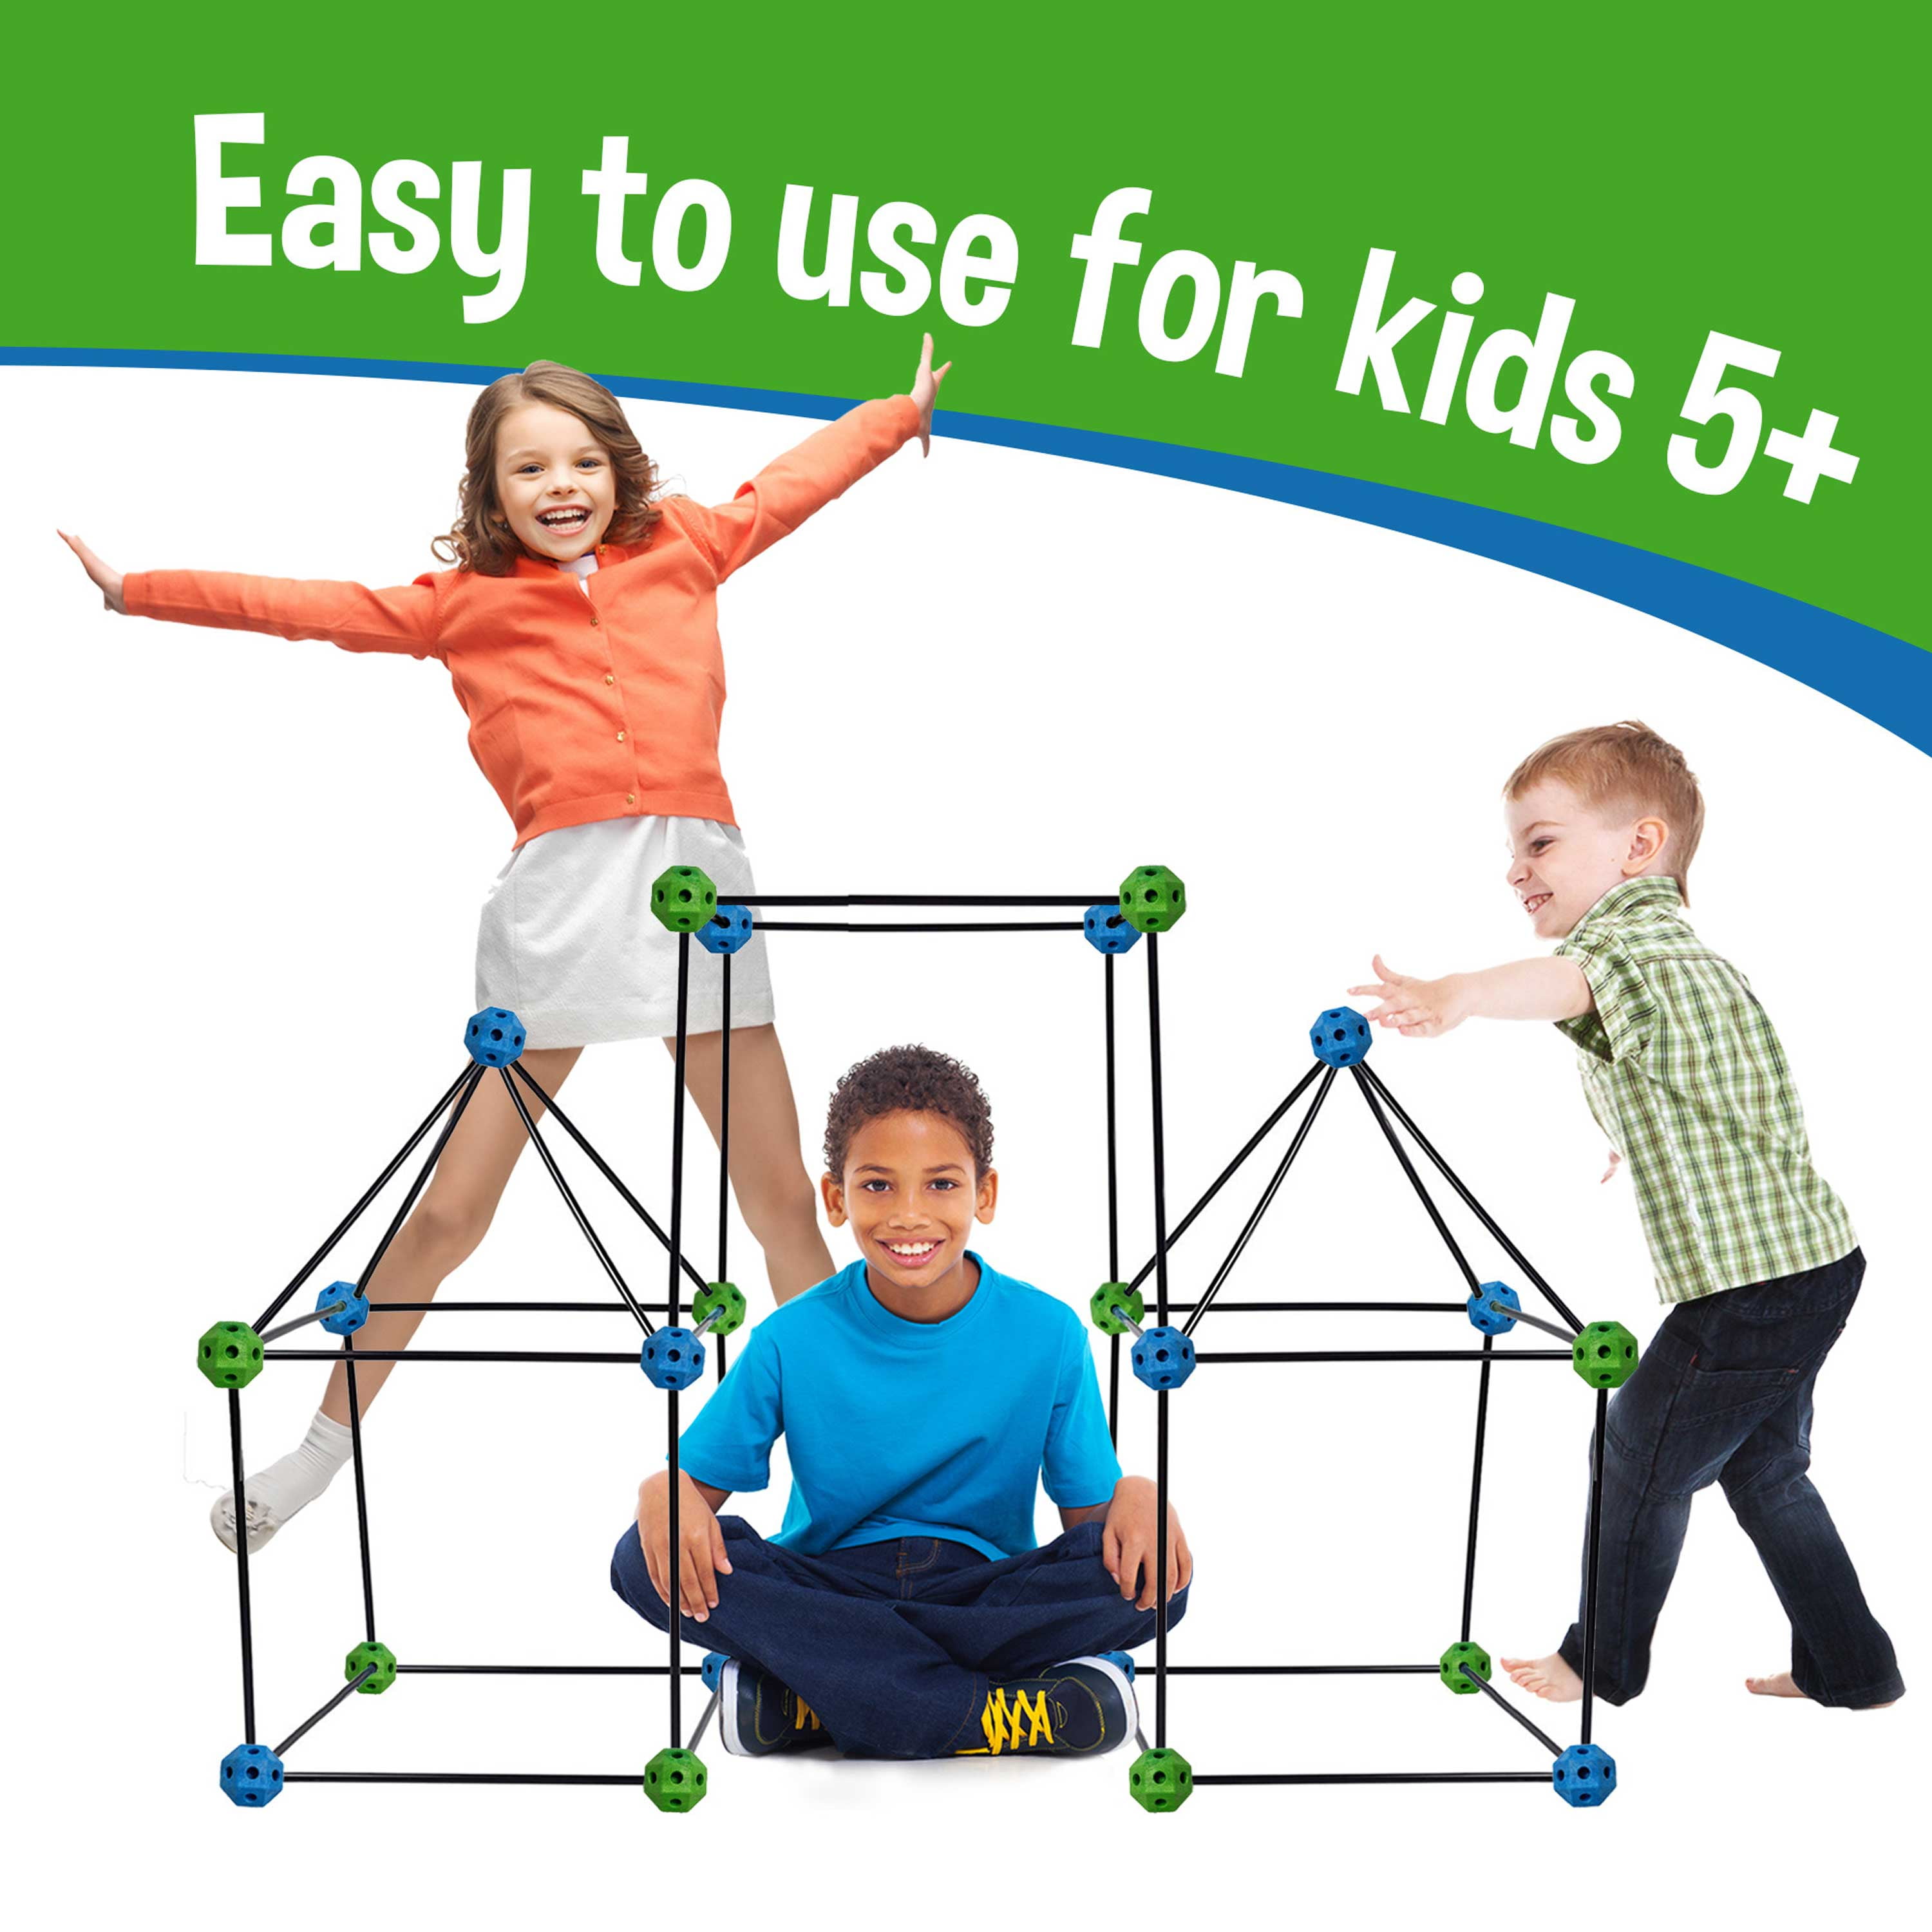 Construction Fort Building Kit Great Discovery of Manual Skills Blue & Green Build Castles Tunnels Tents Rocket- Creativity and Teambuilding 77 Pieces+ Storage Bag 